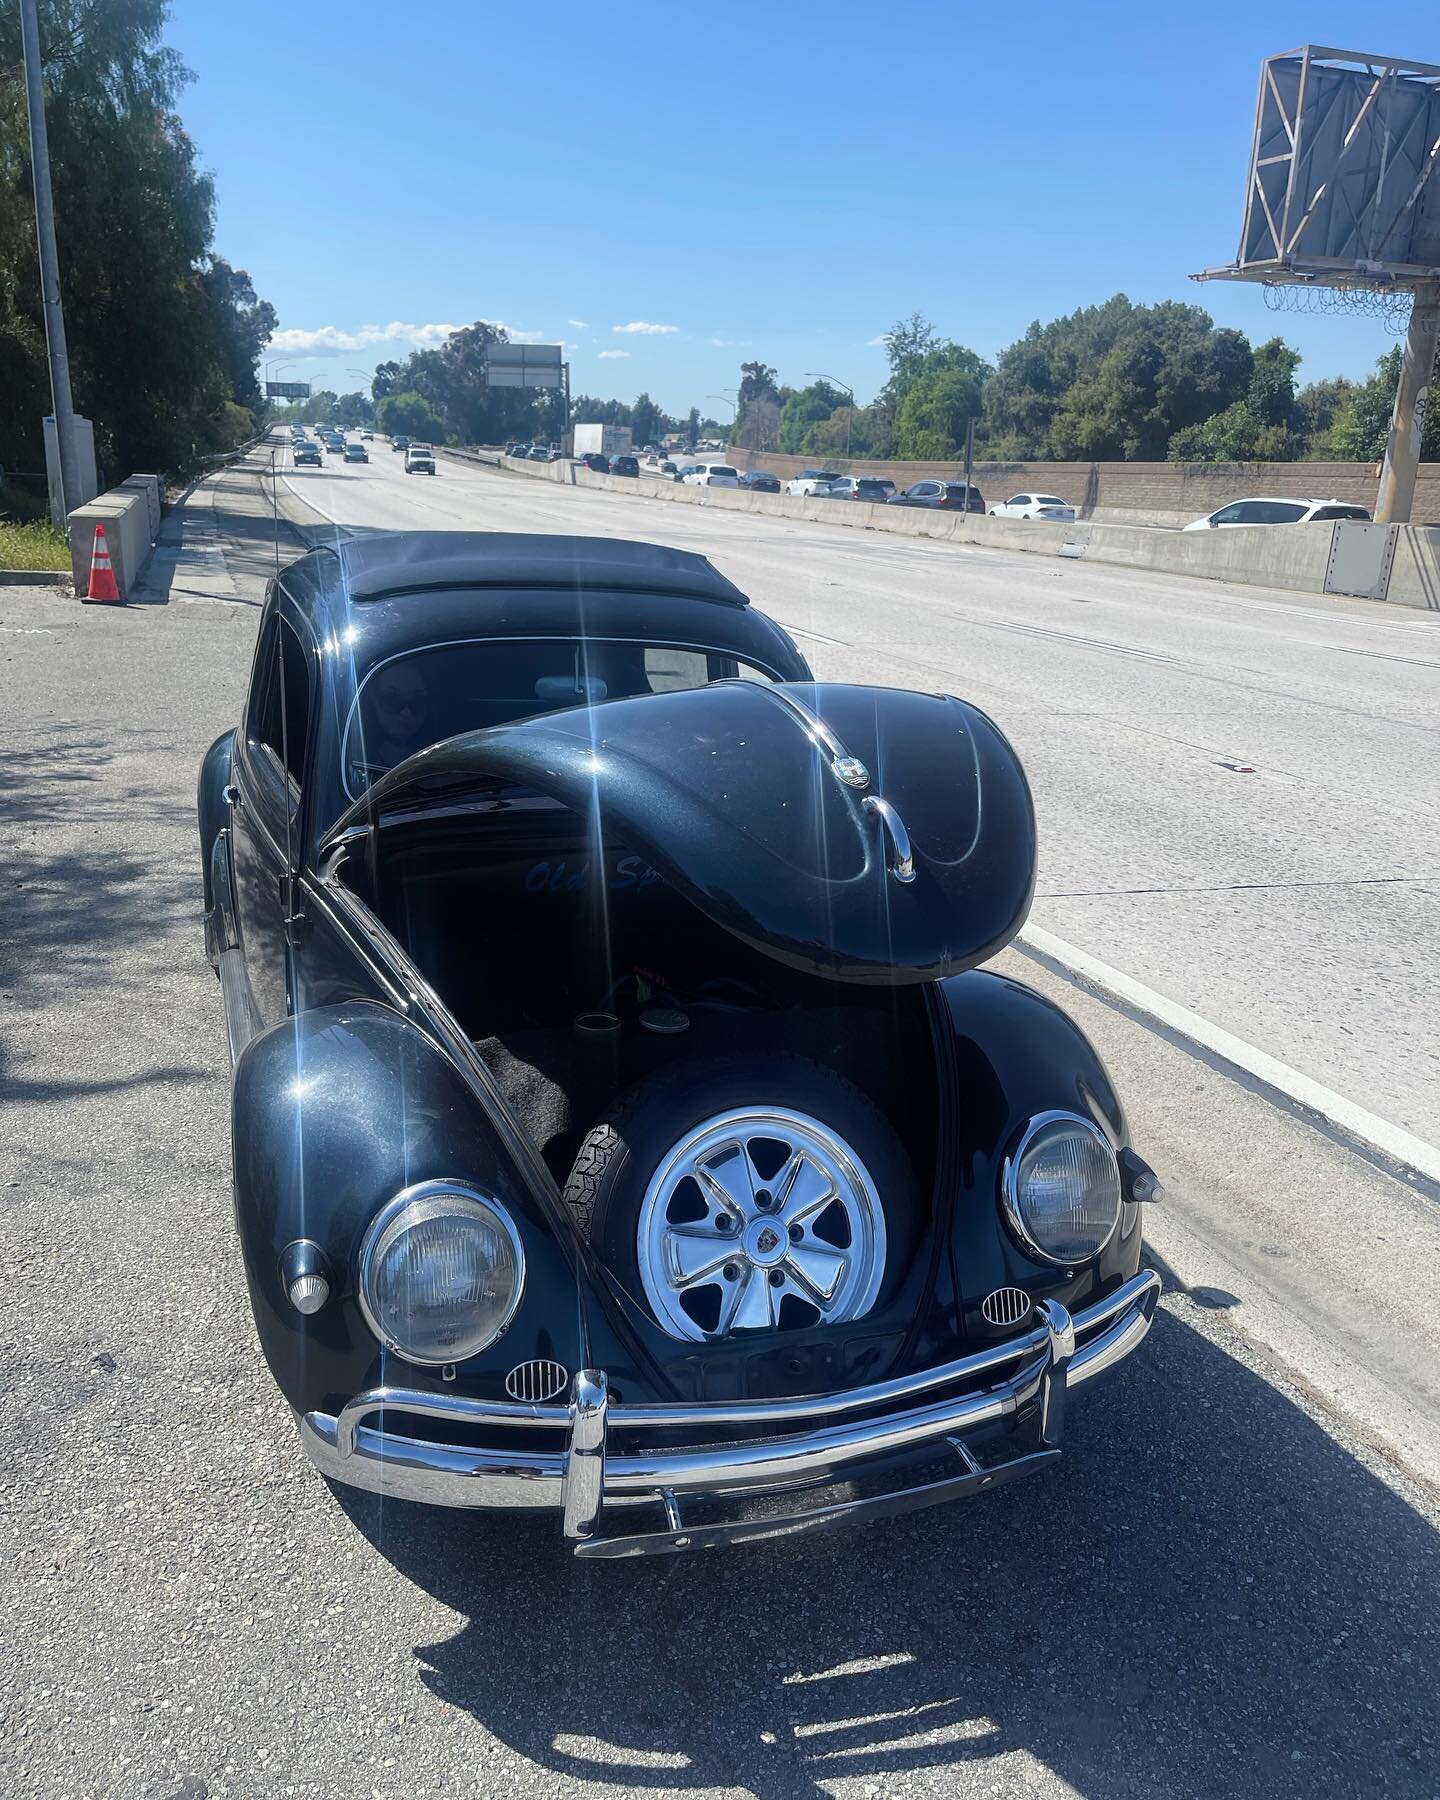 Buggy ran out of gas today , forgot I had it on the reserve tank . Kind of scary merging over past semis while puttering out.  Kind of cool to sit on the side of the freeway with ReAnna , help was there within 20 minutes.  AAA does rule #57vwbug